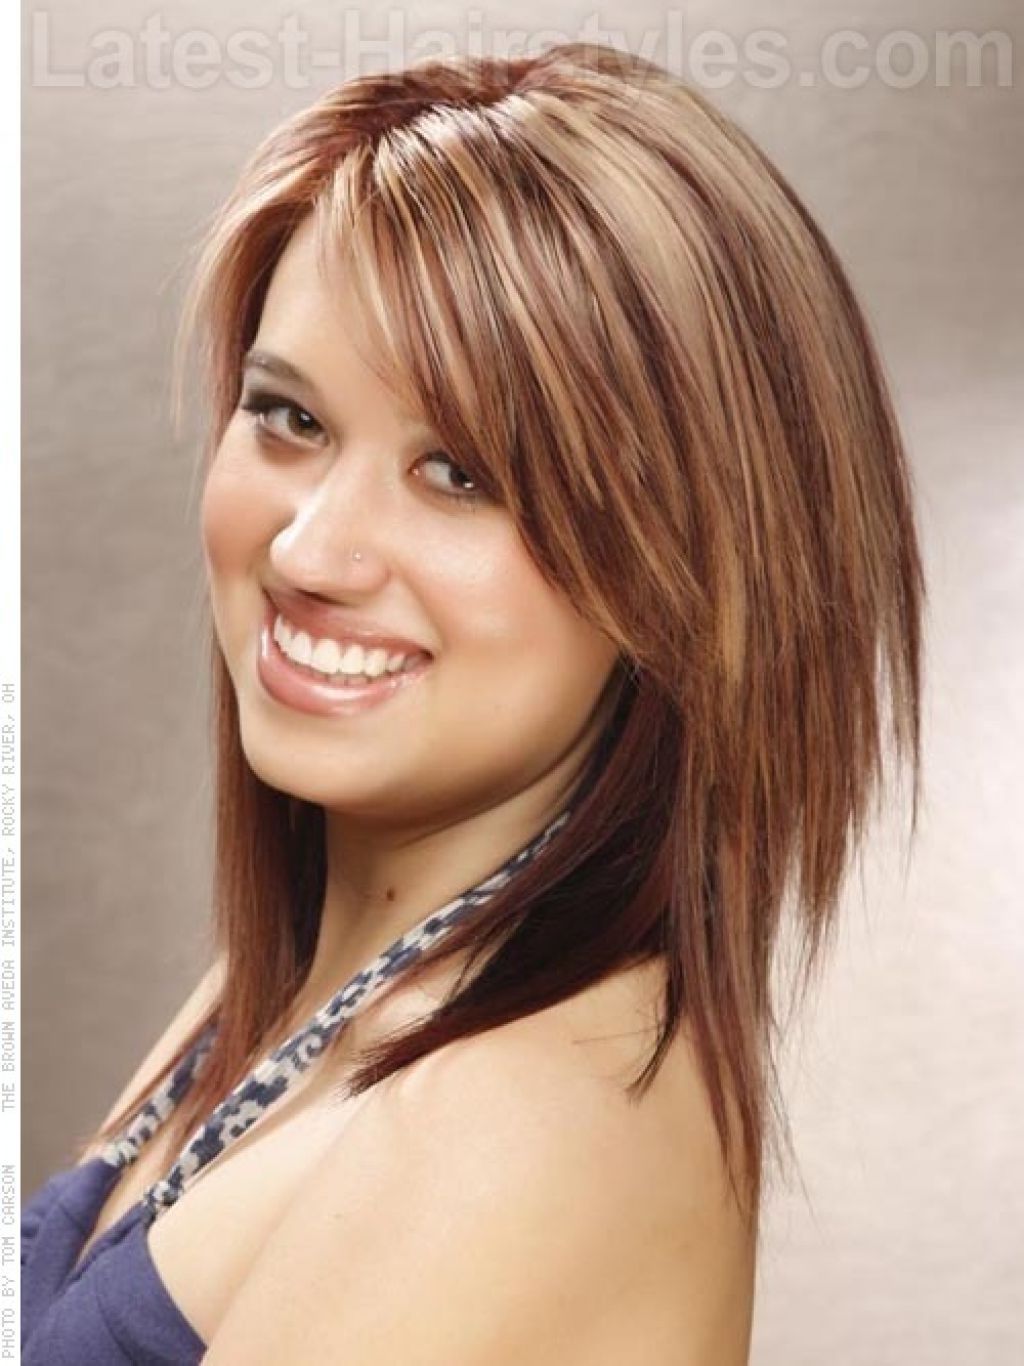 Hair Cuts : Medium Length Layered Hairstyles For Fine Hair Women For Newest Medium Haircuts For Fat Oval Faces (View 16 of 20)